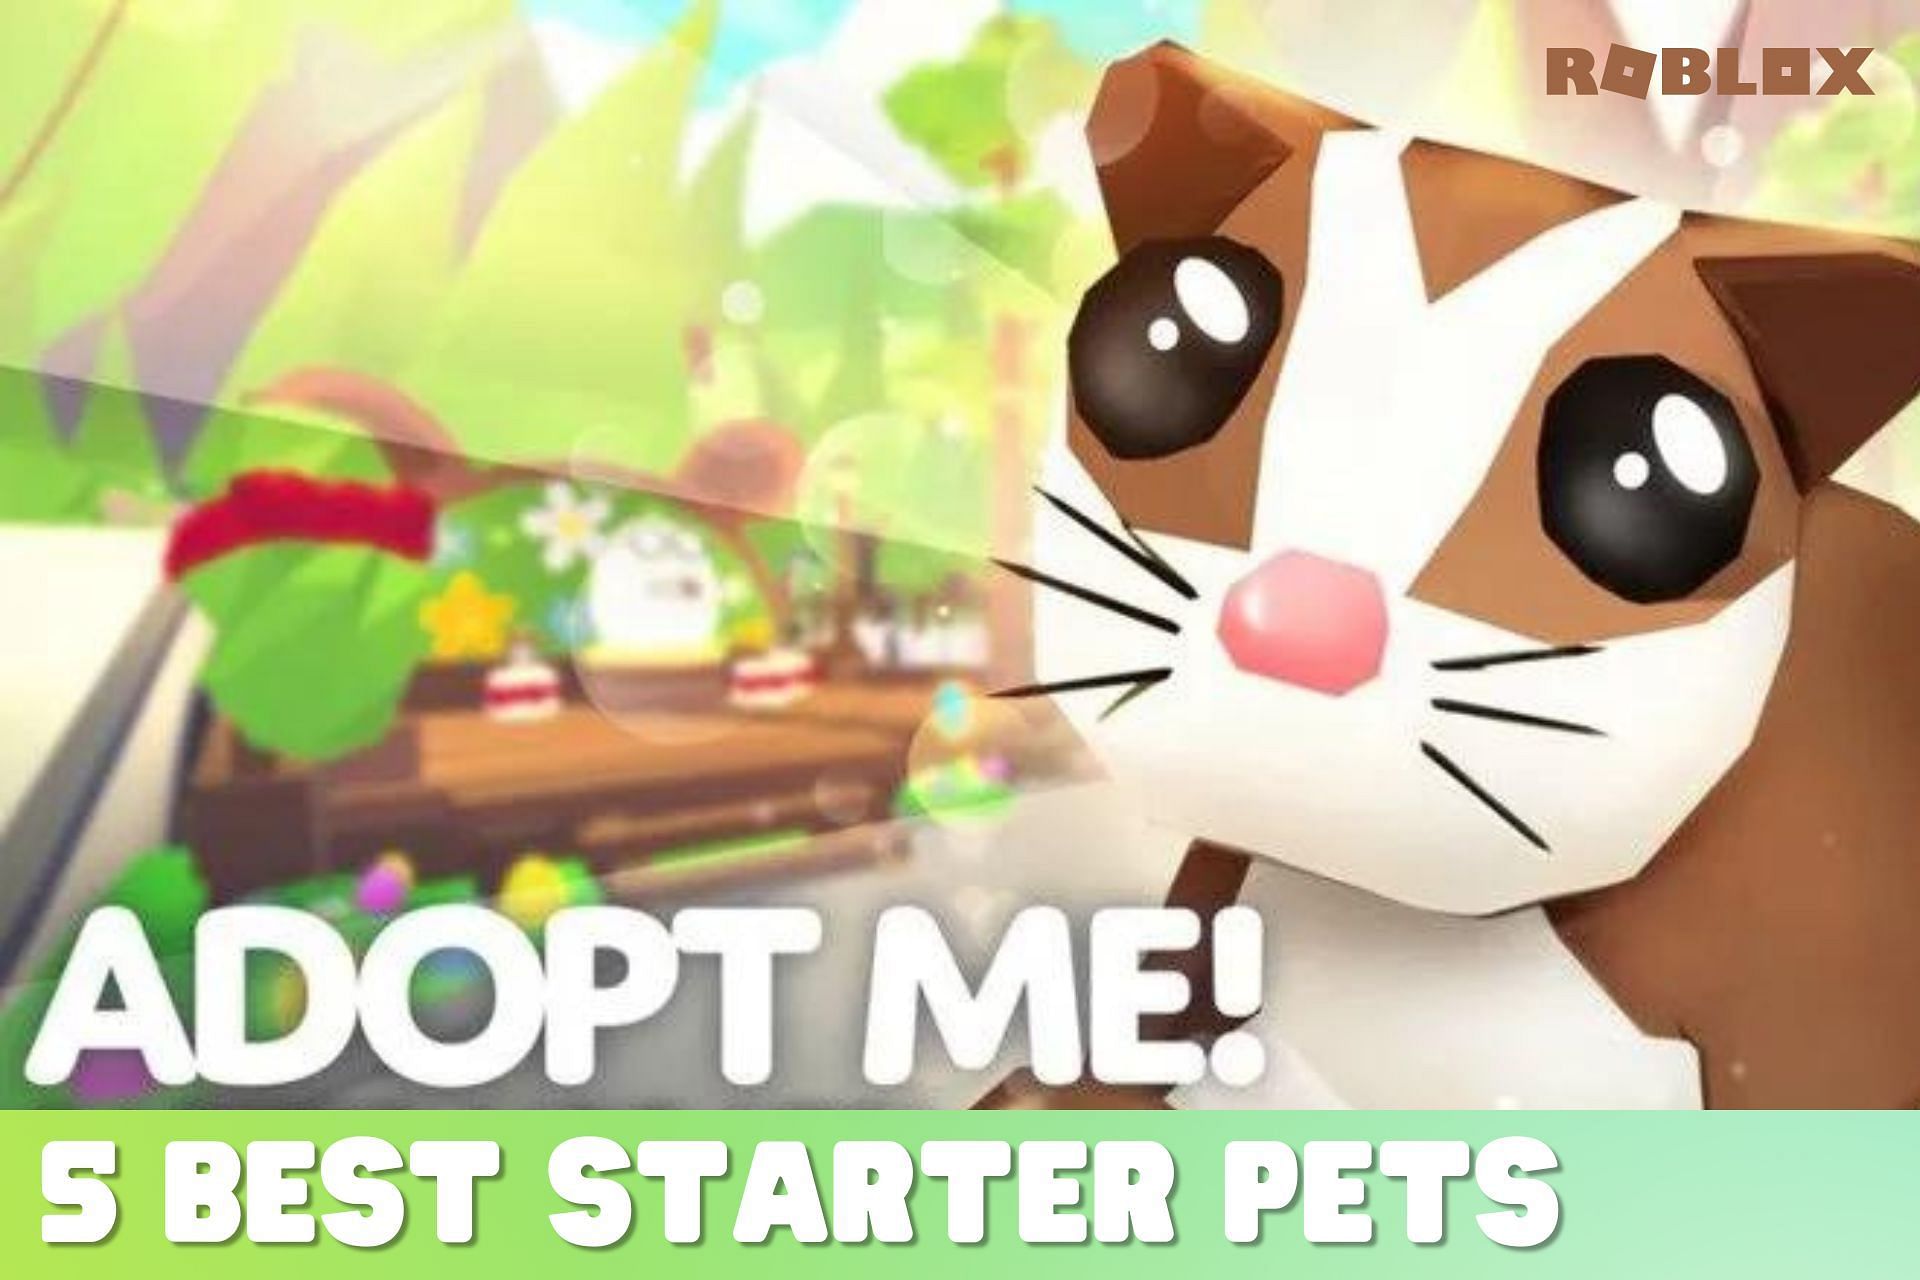 5 best starter pets on Roblox Adopt Me!